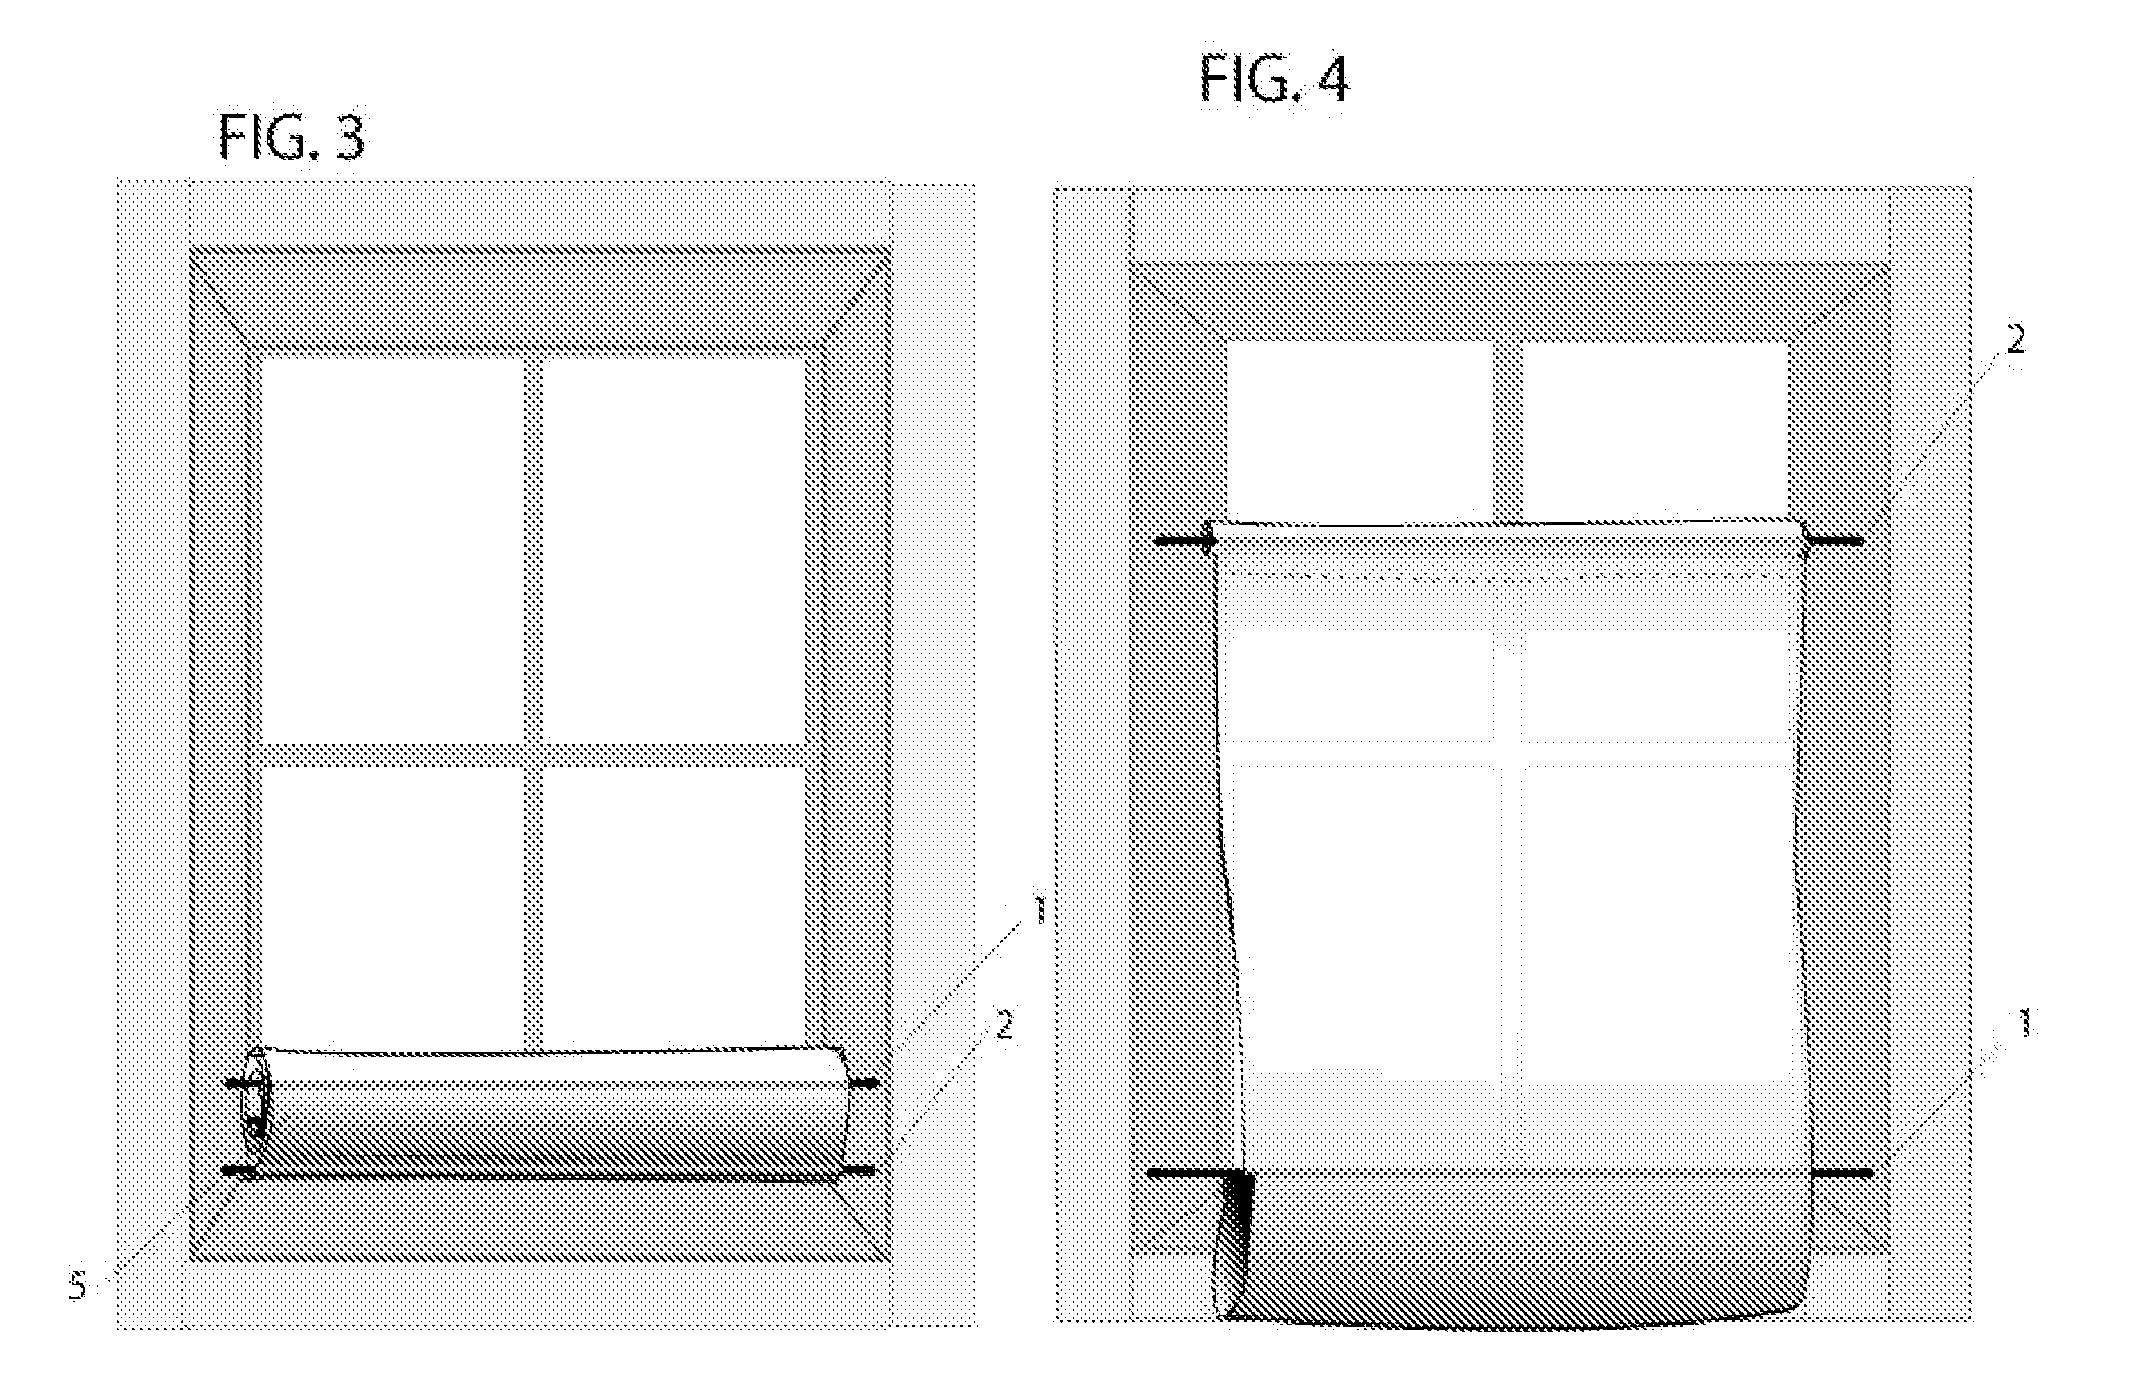 Method and Means for Creating an Unobtrusive and Portable Environmental Barrier for Windows